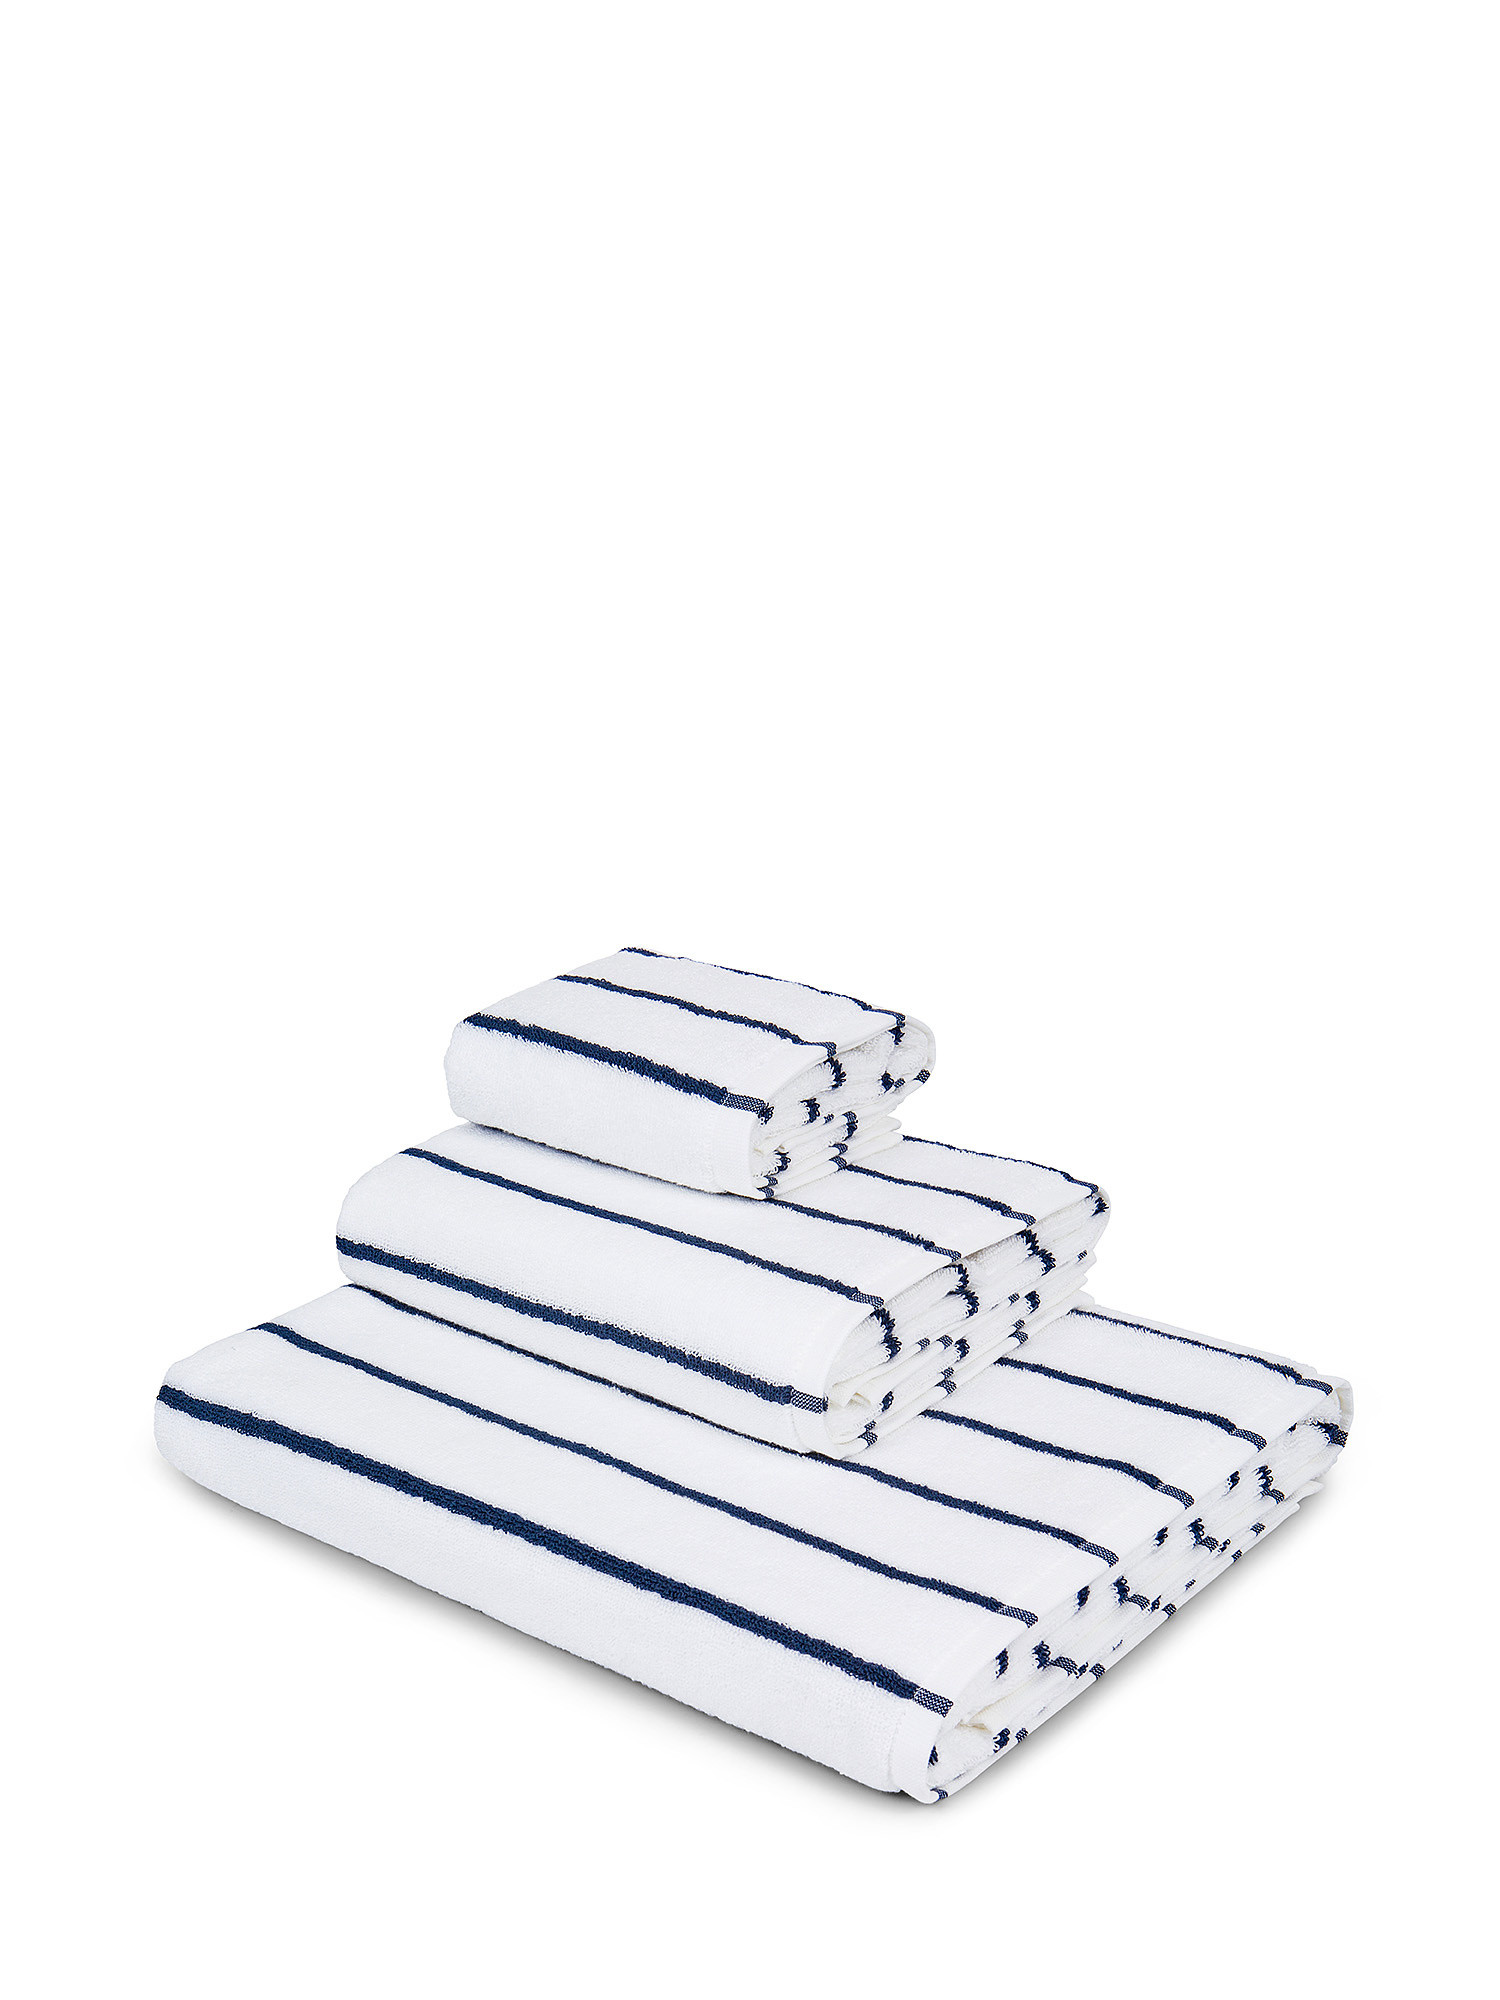 Pure cotton terry towel., Dark Blue, large image number 0